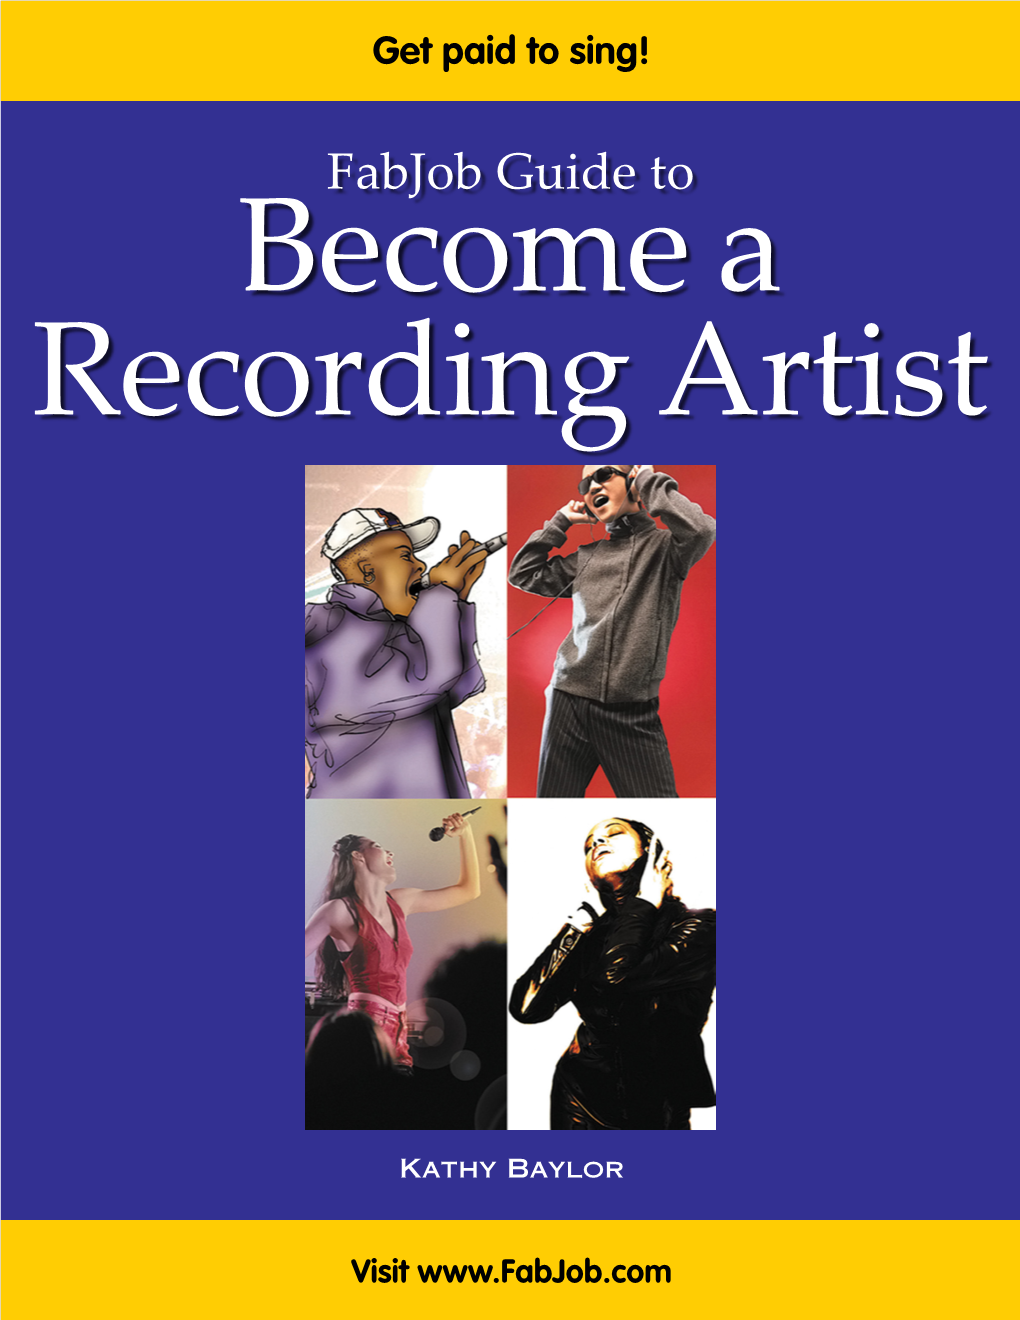 Fabjob Guide to Become a Recording Artist